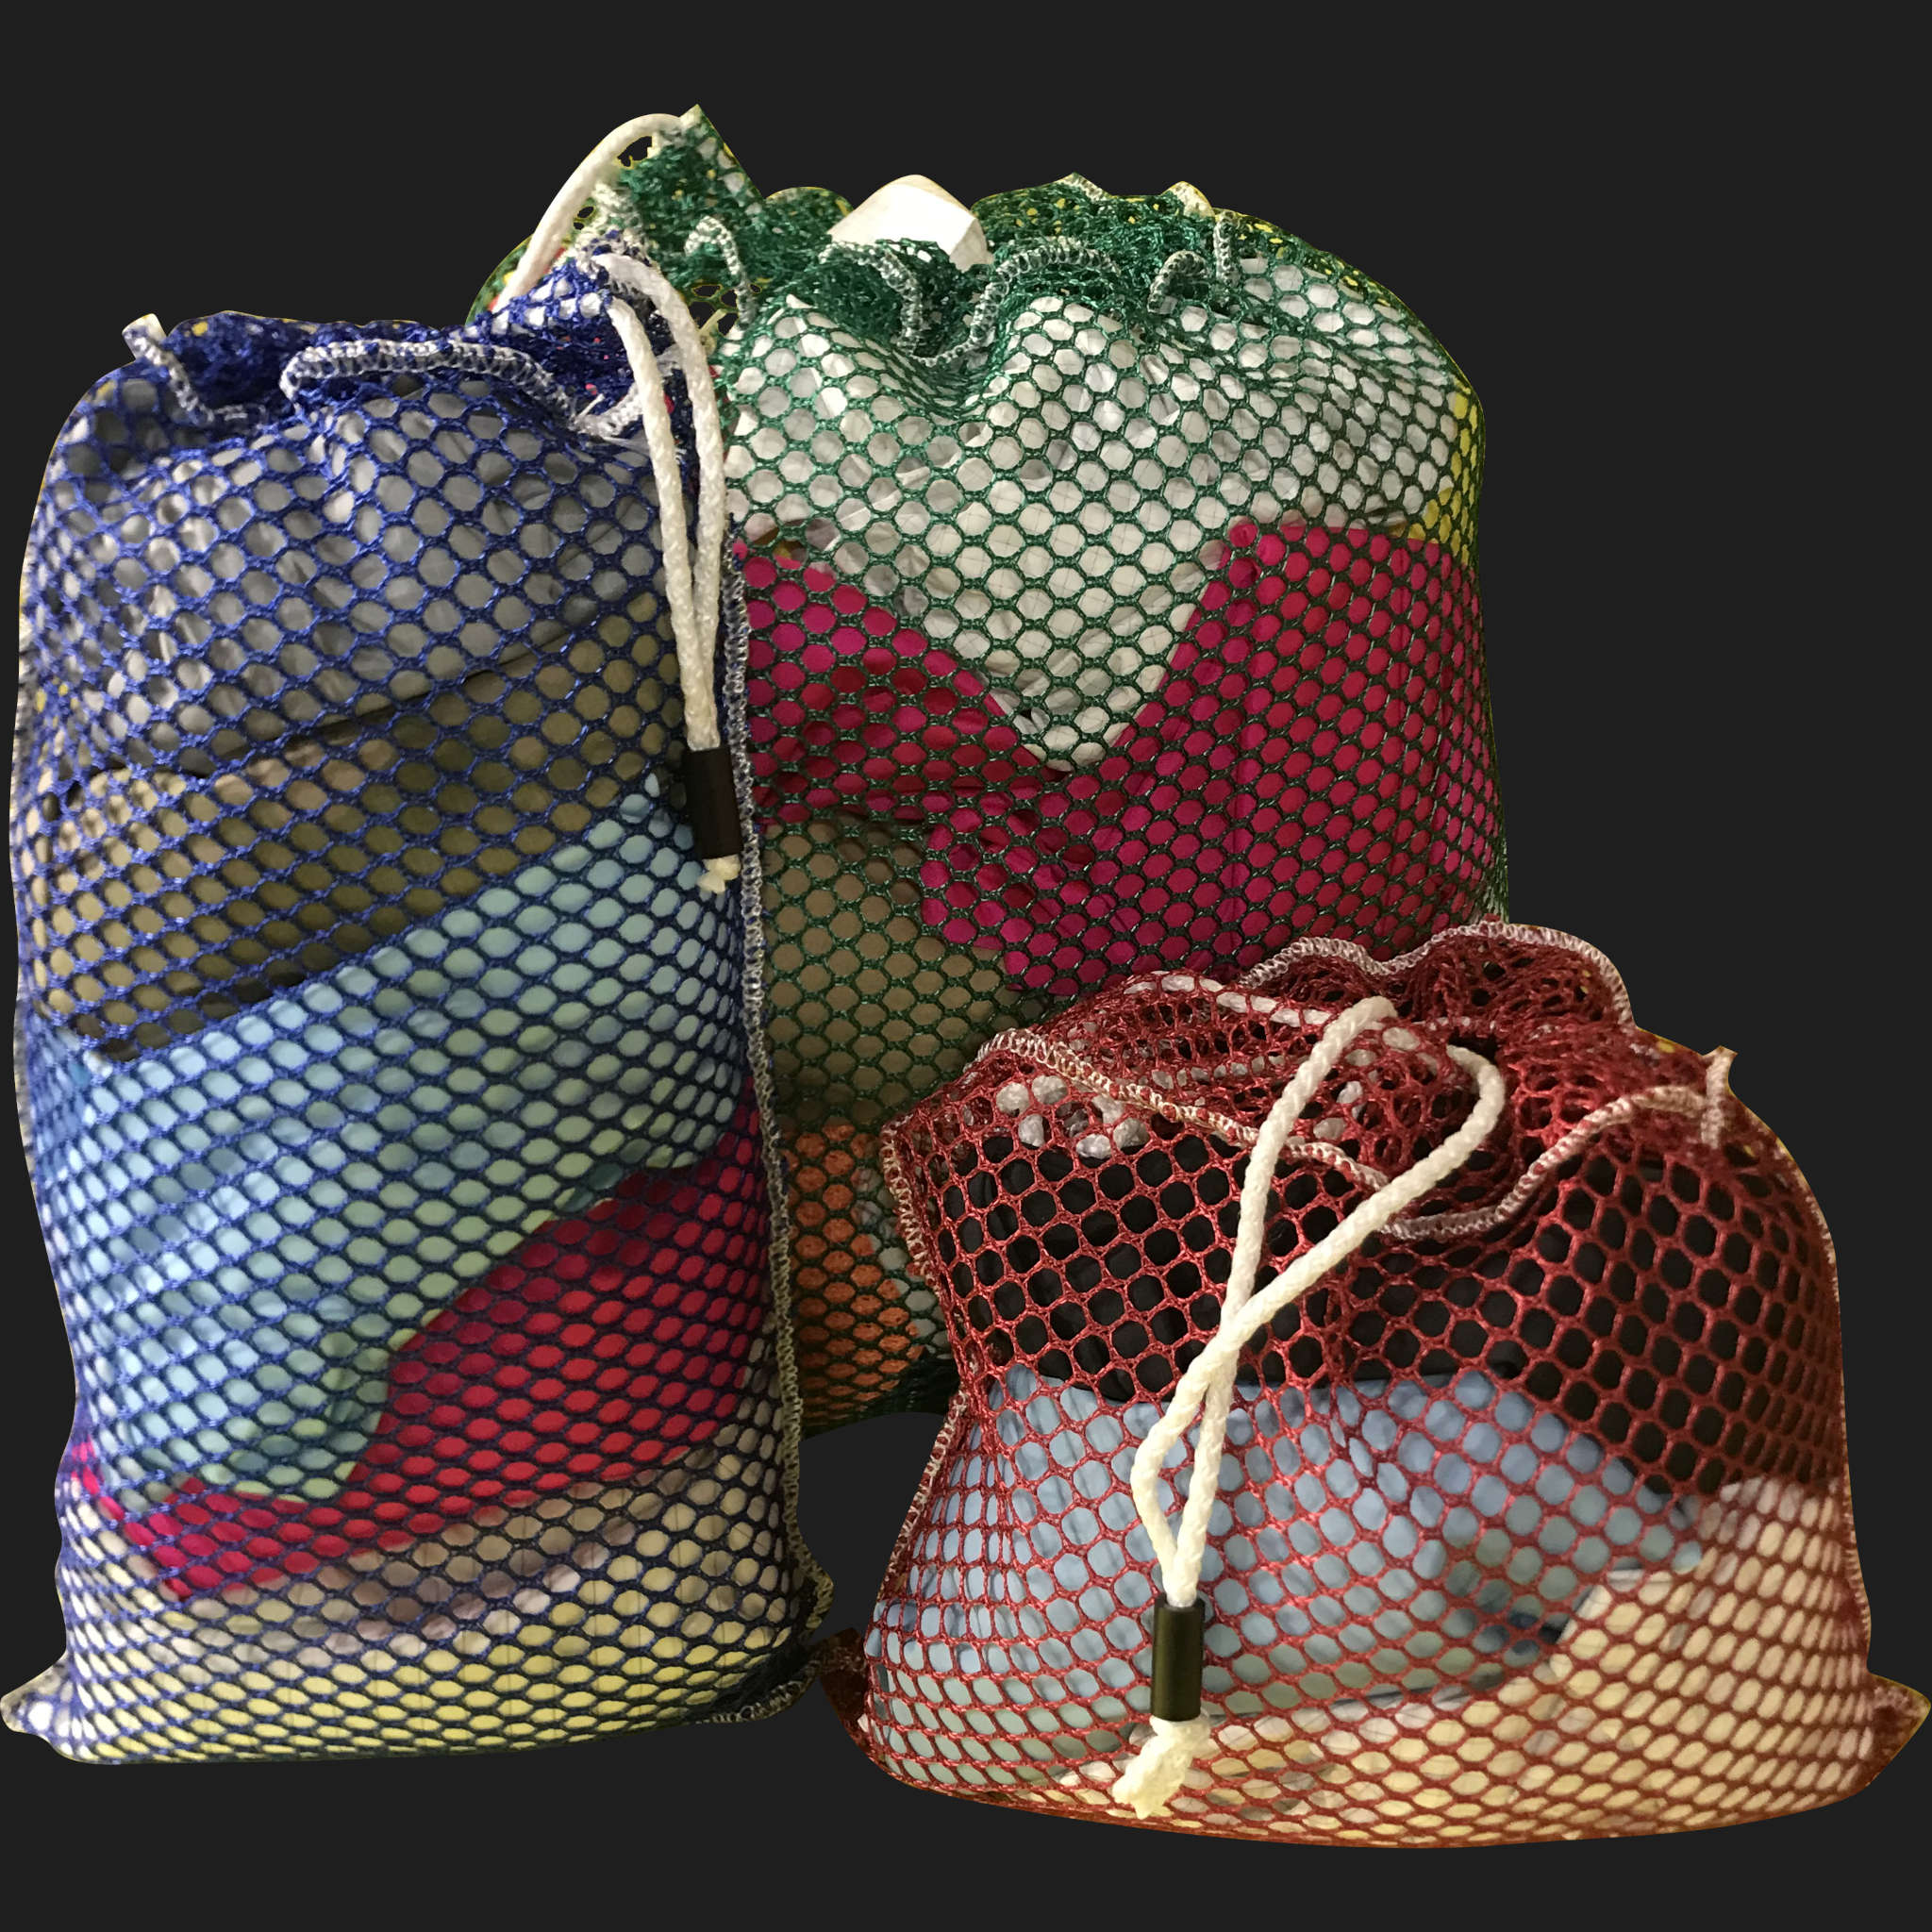 18" x 32" Customized Mesh-Net-Laundry Bags Heavy Duty with Cord and barrellock closure